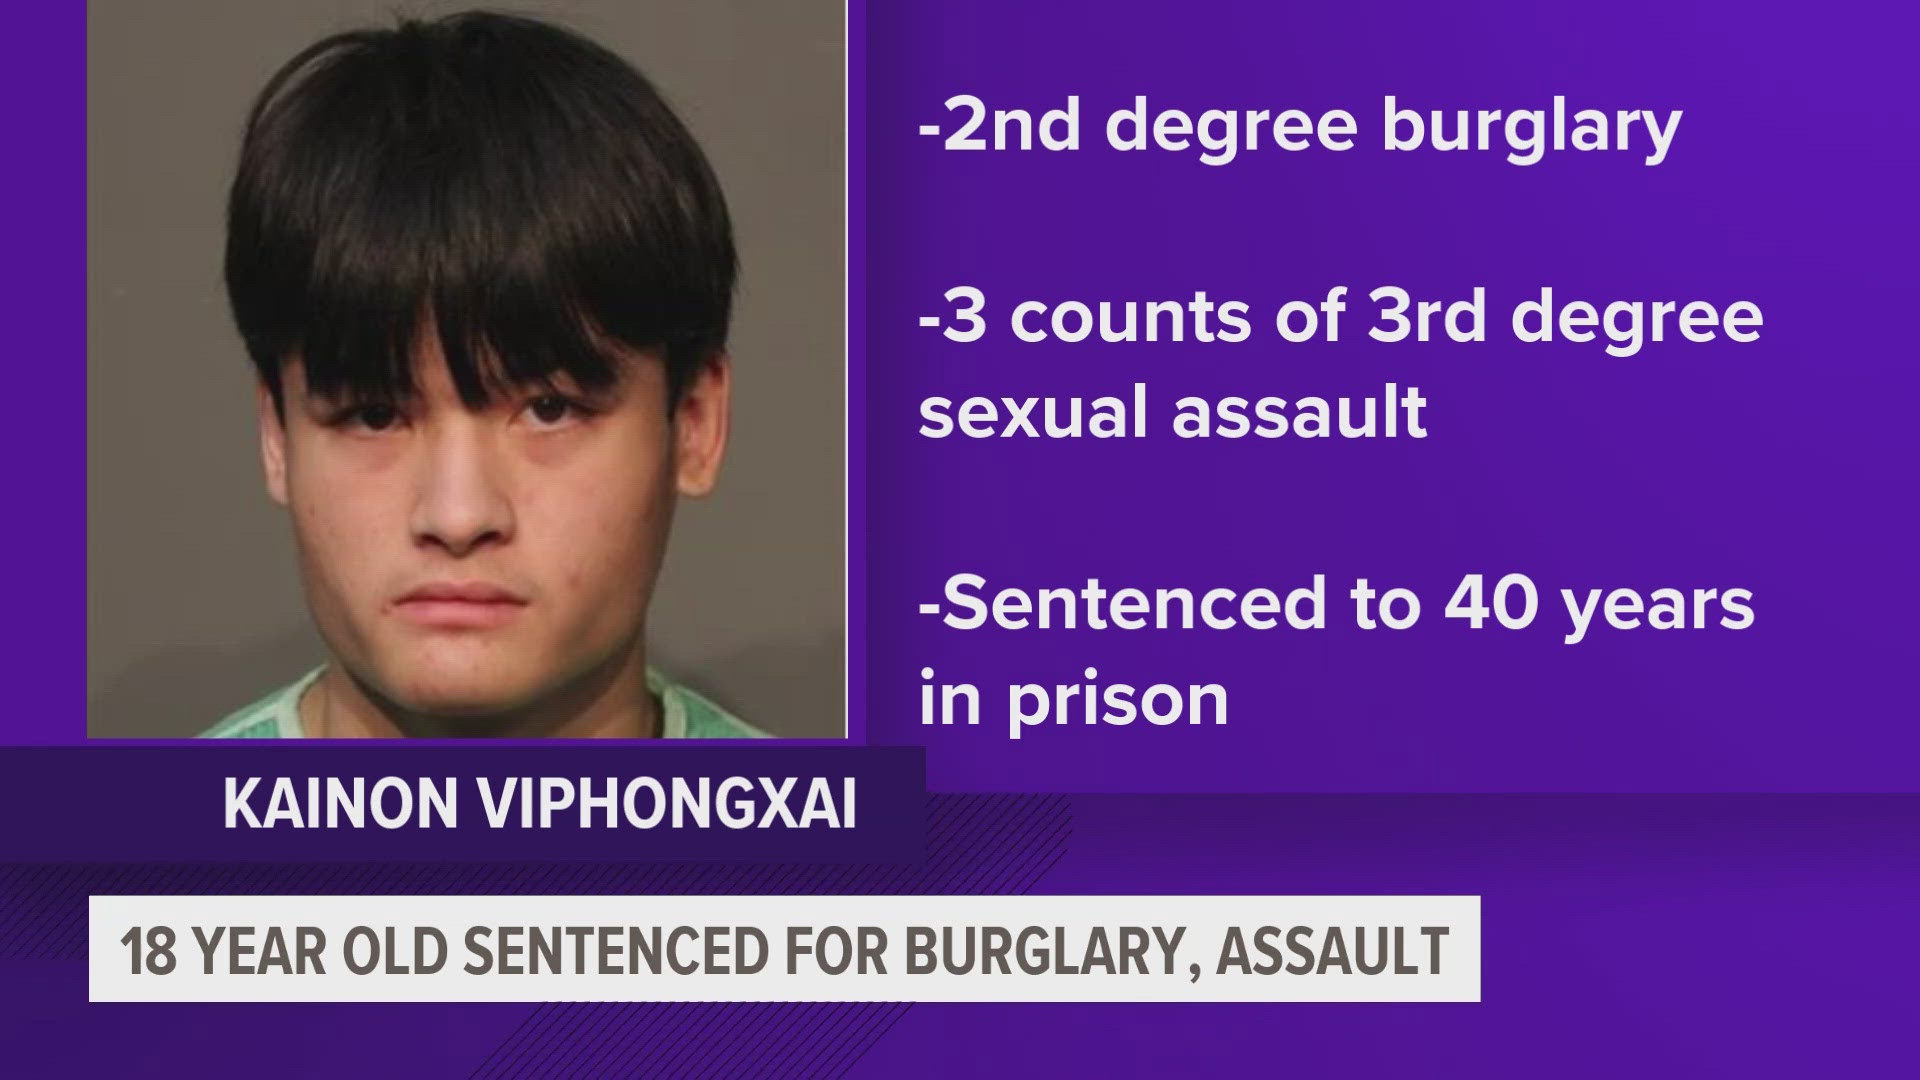 The 18-year-old pleaded guilty to three counts of third-degree sexual assault and one count of second-degree burglary under a plea bargain.